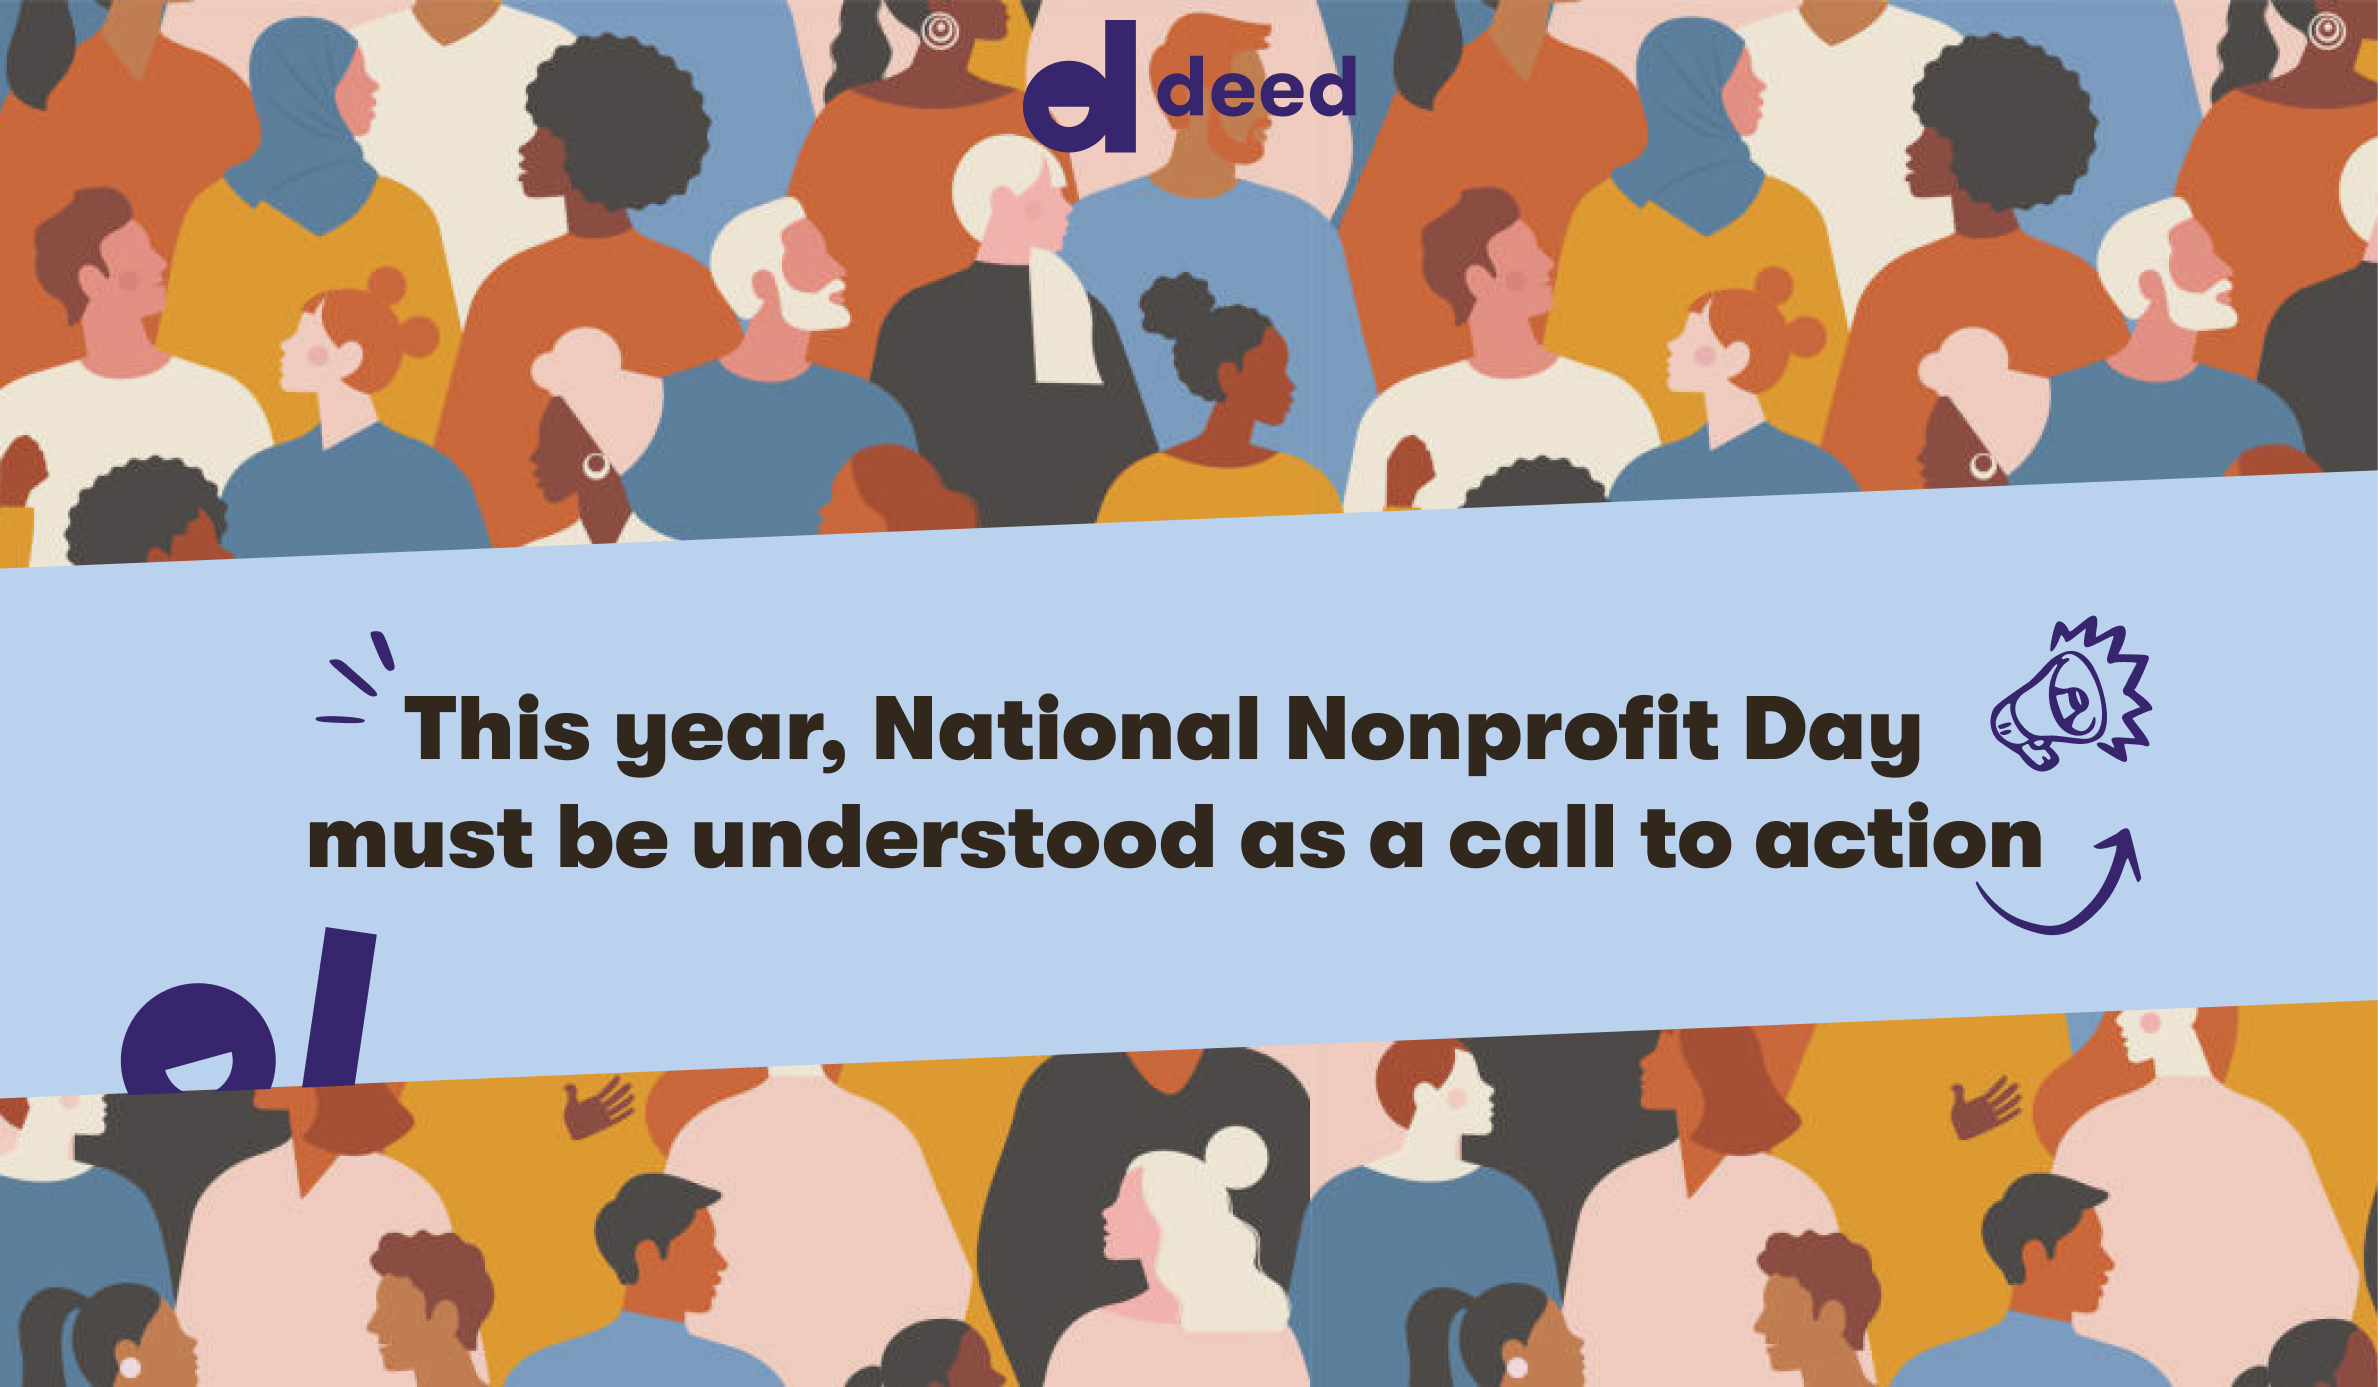 This year, National Nonprofit Day must be understood as a call to action